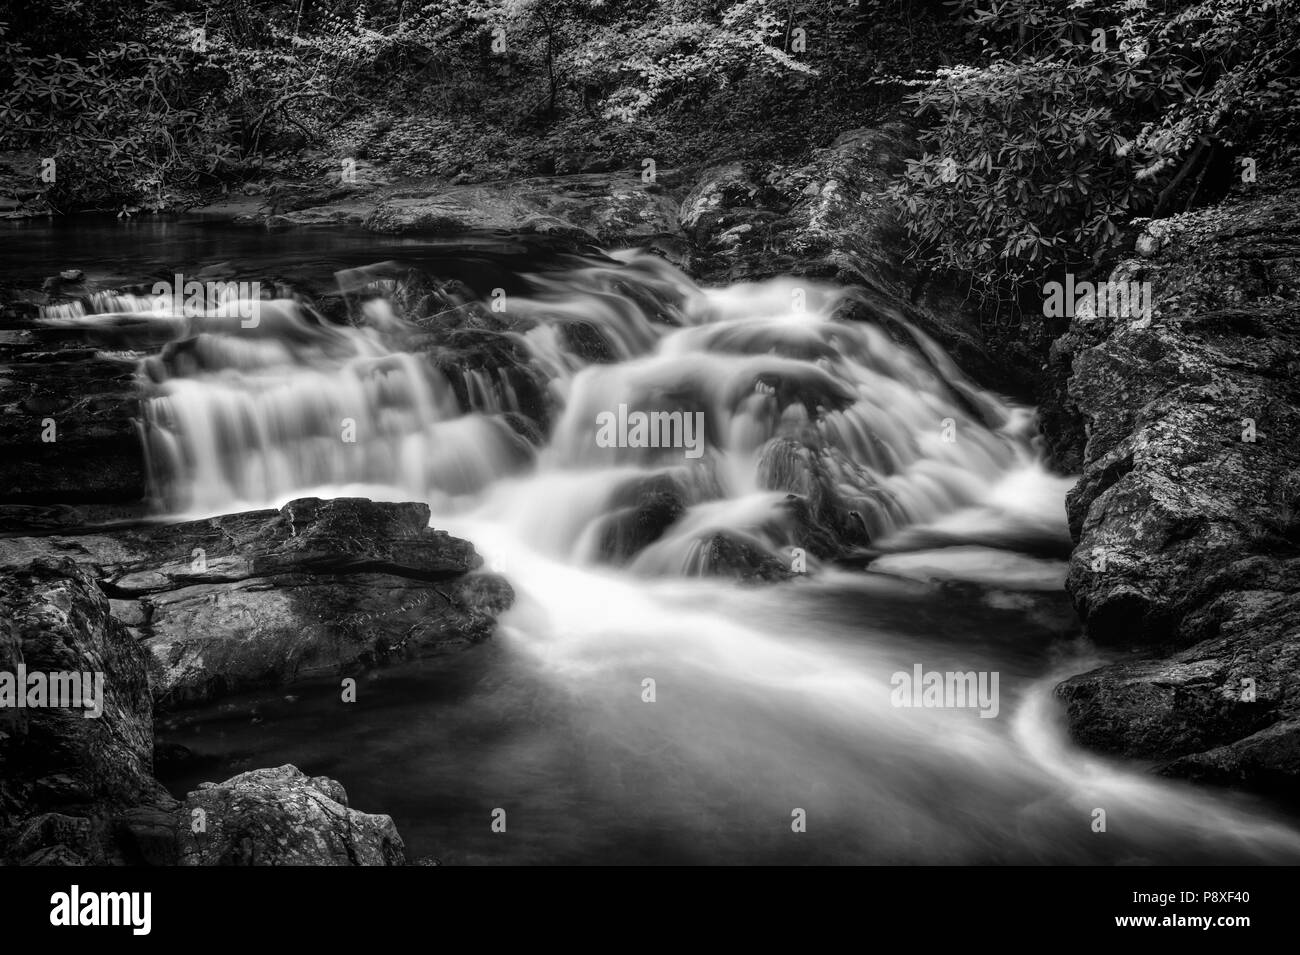 A long-exposure, black and white of swift, rushing water over Laurel Falls in the Great Smoky Mountain National Park. Stock Photo